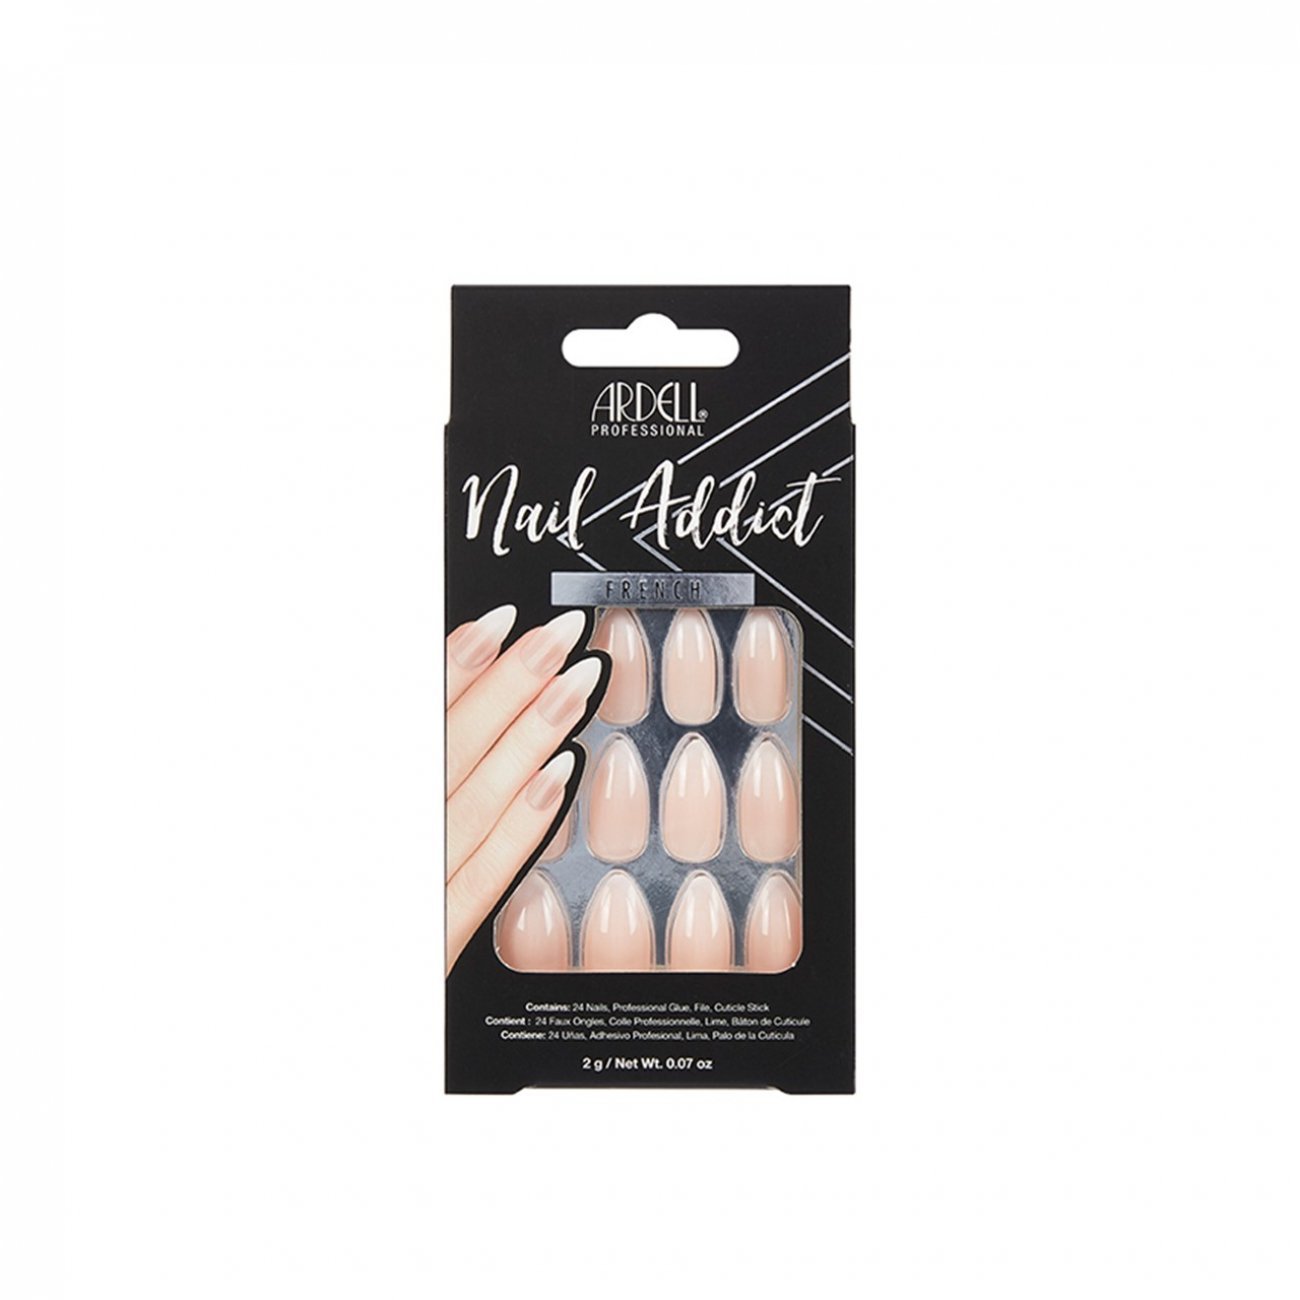 Buy Ardell Nail Addict French Artificial Nails Ombre Fade x24 · Saudi Arabia